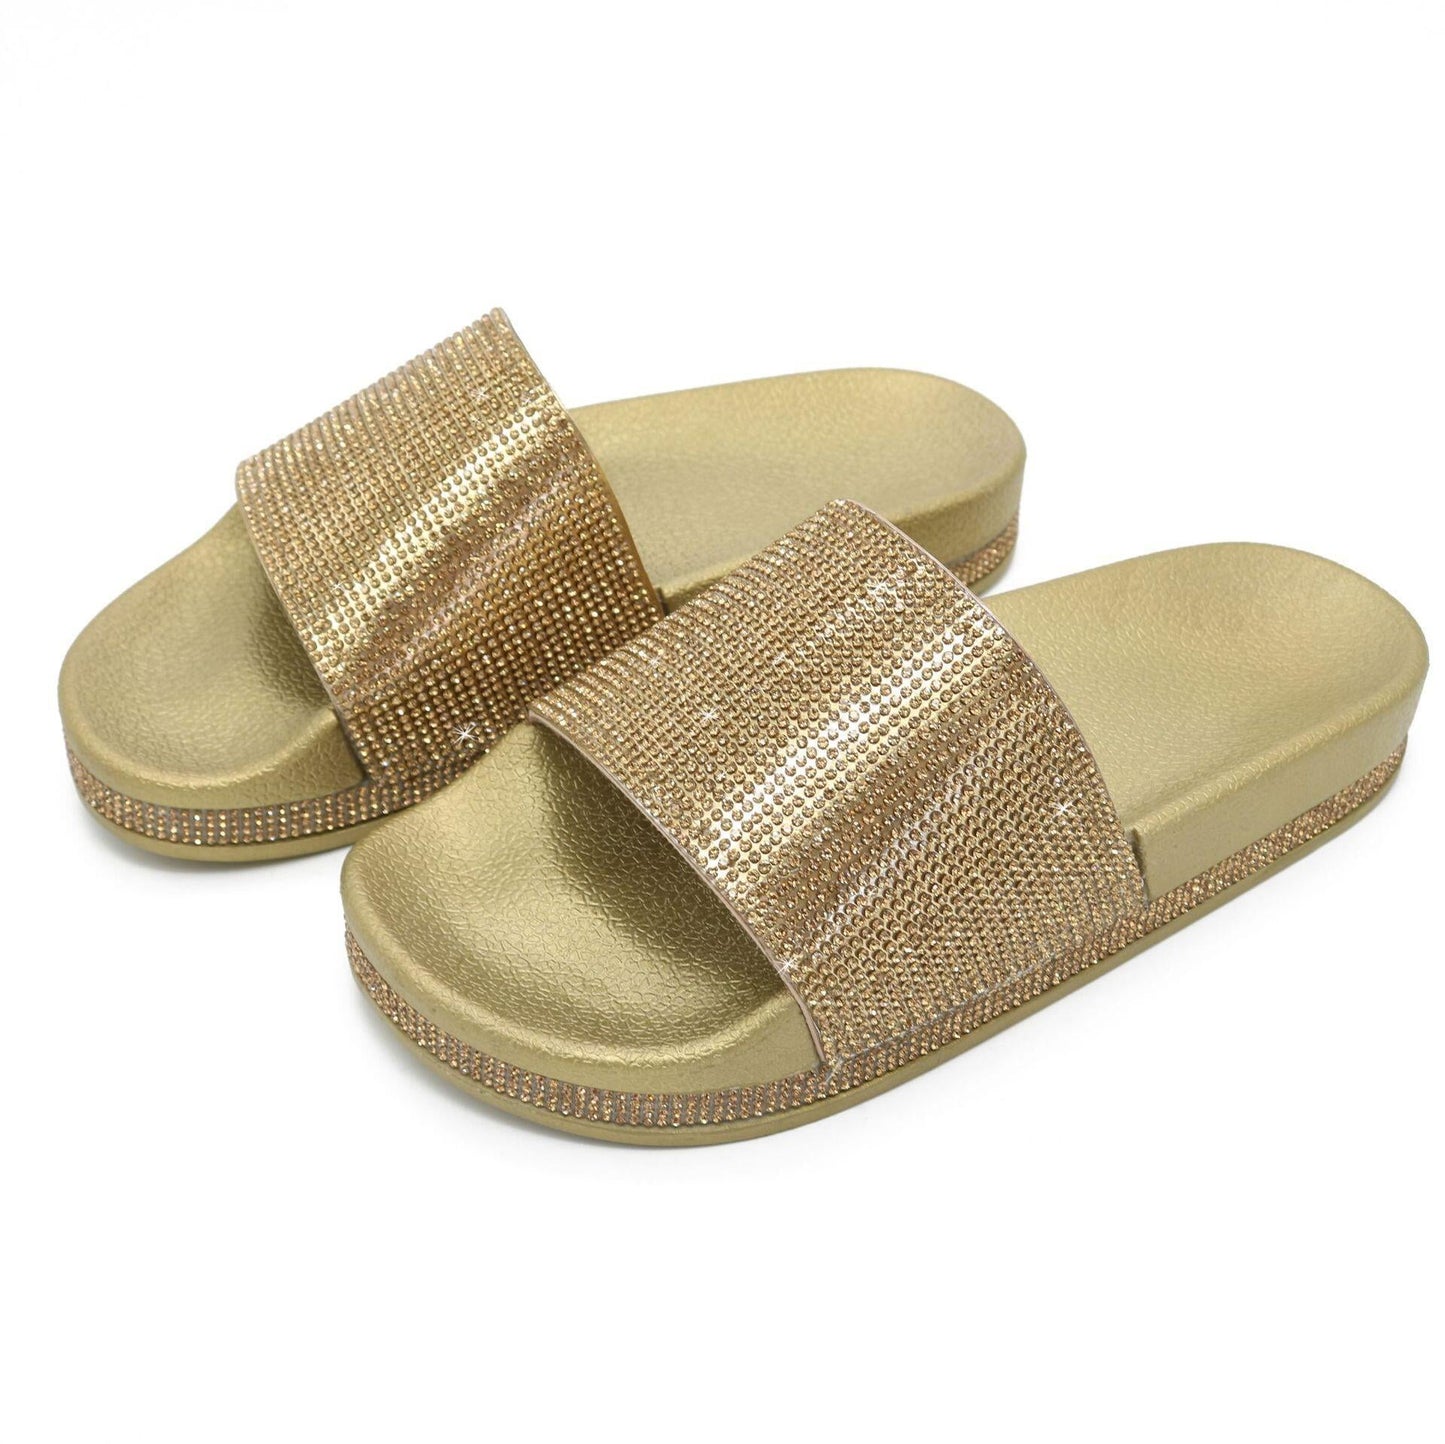 Bling Comfy Slippers